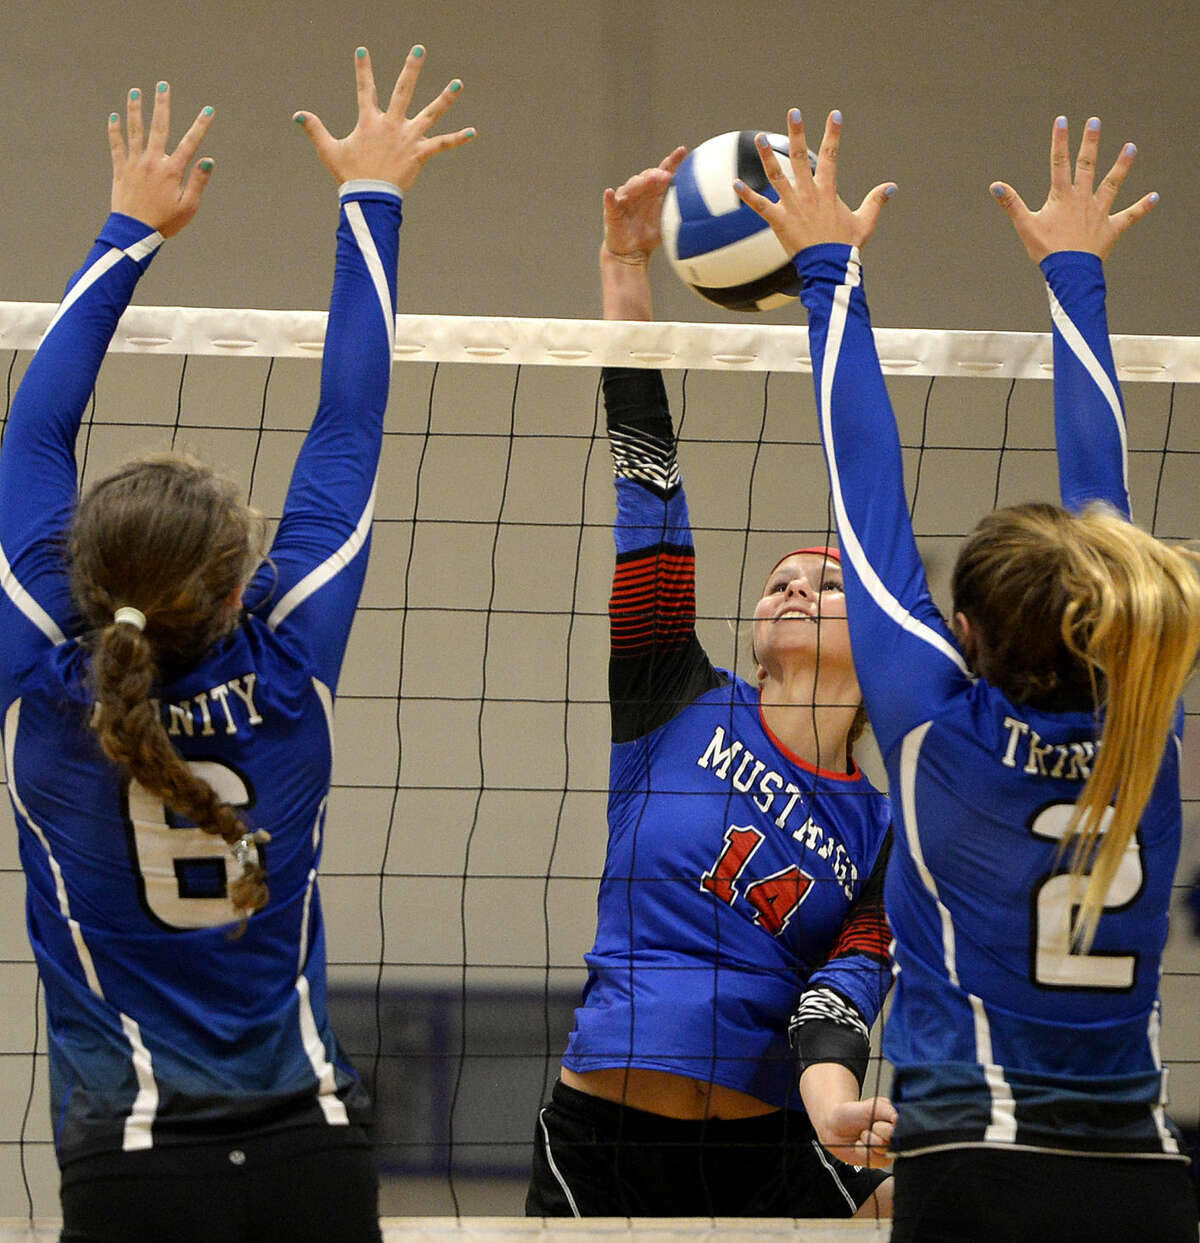 Midland Christian's Meagan Thomason (14) attempts to hit past Trinity's Mady Walker (6) and Carrie Herd (2) on Tuesday, August 11, 2015 at Beal Gymnasium. James Durbin/Reporter-Telegram